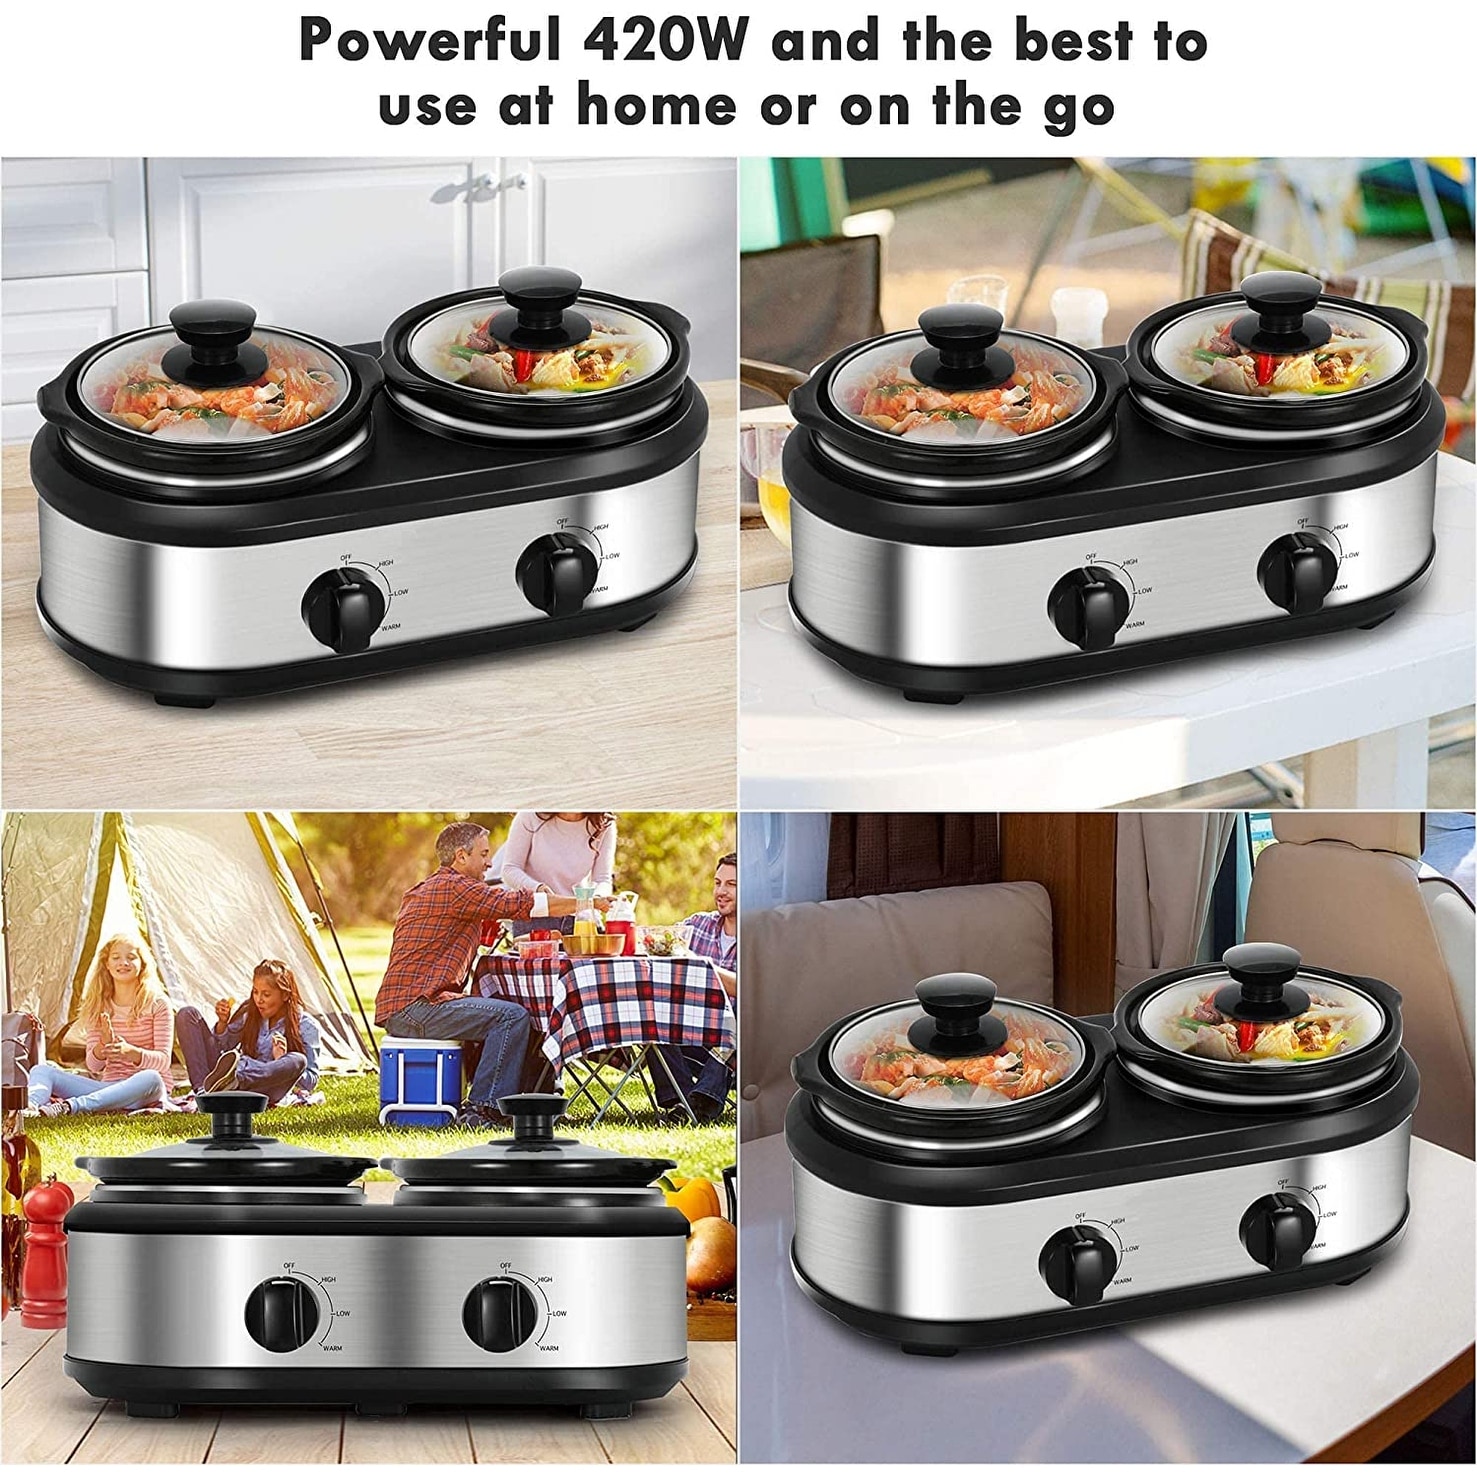 https://ak1.ostkcdn.com/images/products/is/images/direct/fb563fa7e5acdd9b992e9caeef815cfc1e3b6be5/Triple-Slow-Cooker%2C-3%C3%971.5-QT-Buffet-Servers-and-Warmers%2C-3-Pots-Buffet-Slow-Cooker-Adjustable-Temp.jpg